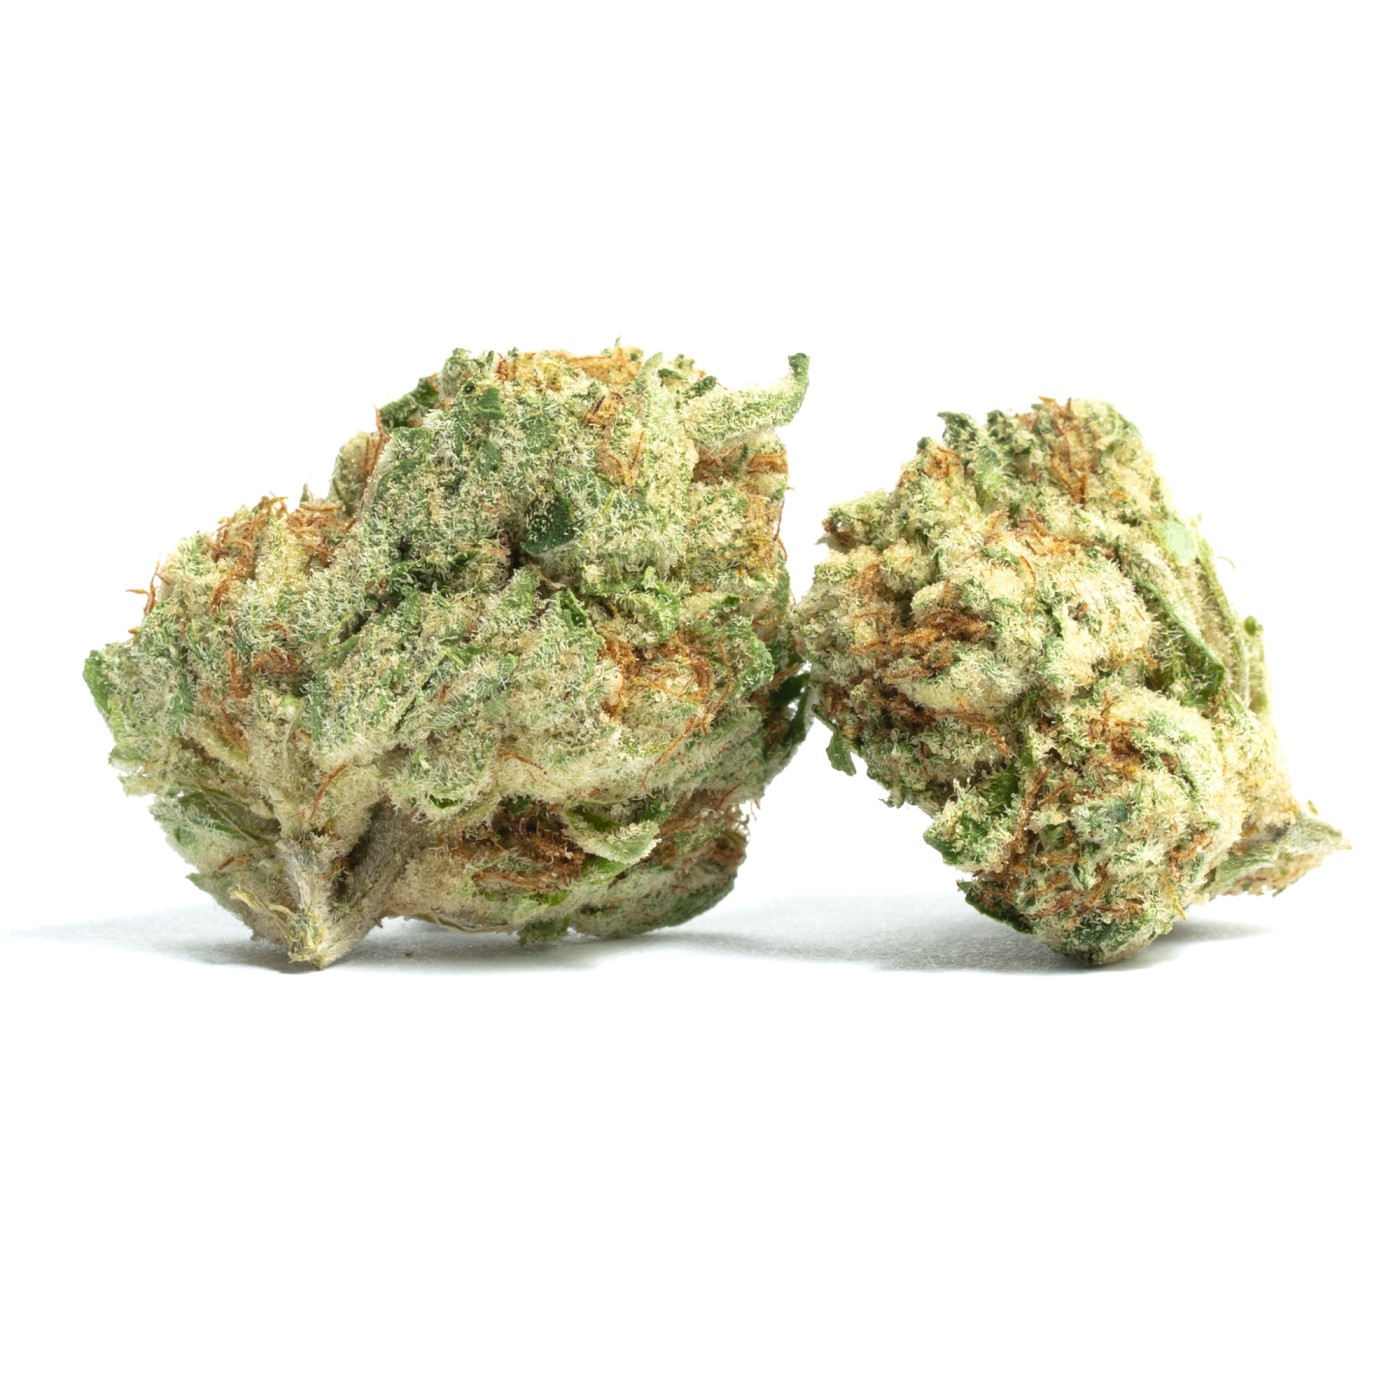 Pei Cannabis Dispensary Canada, The Grow House | Buy Weed Online at the #1 Dispensary